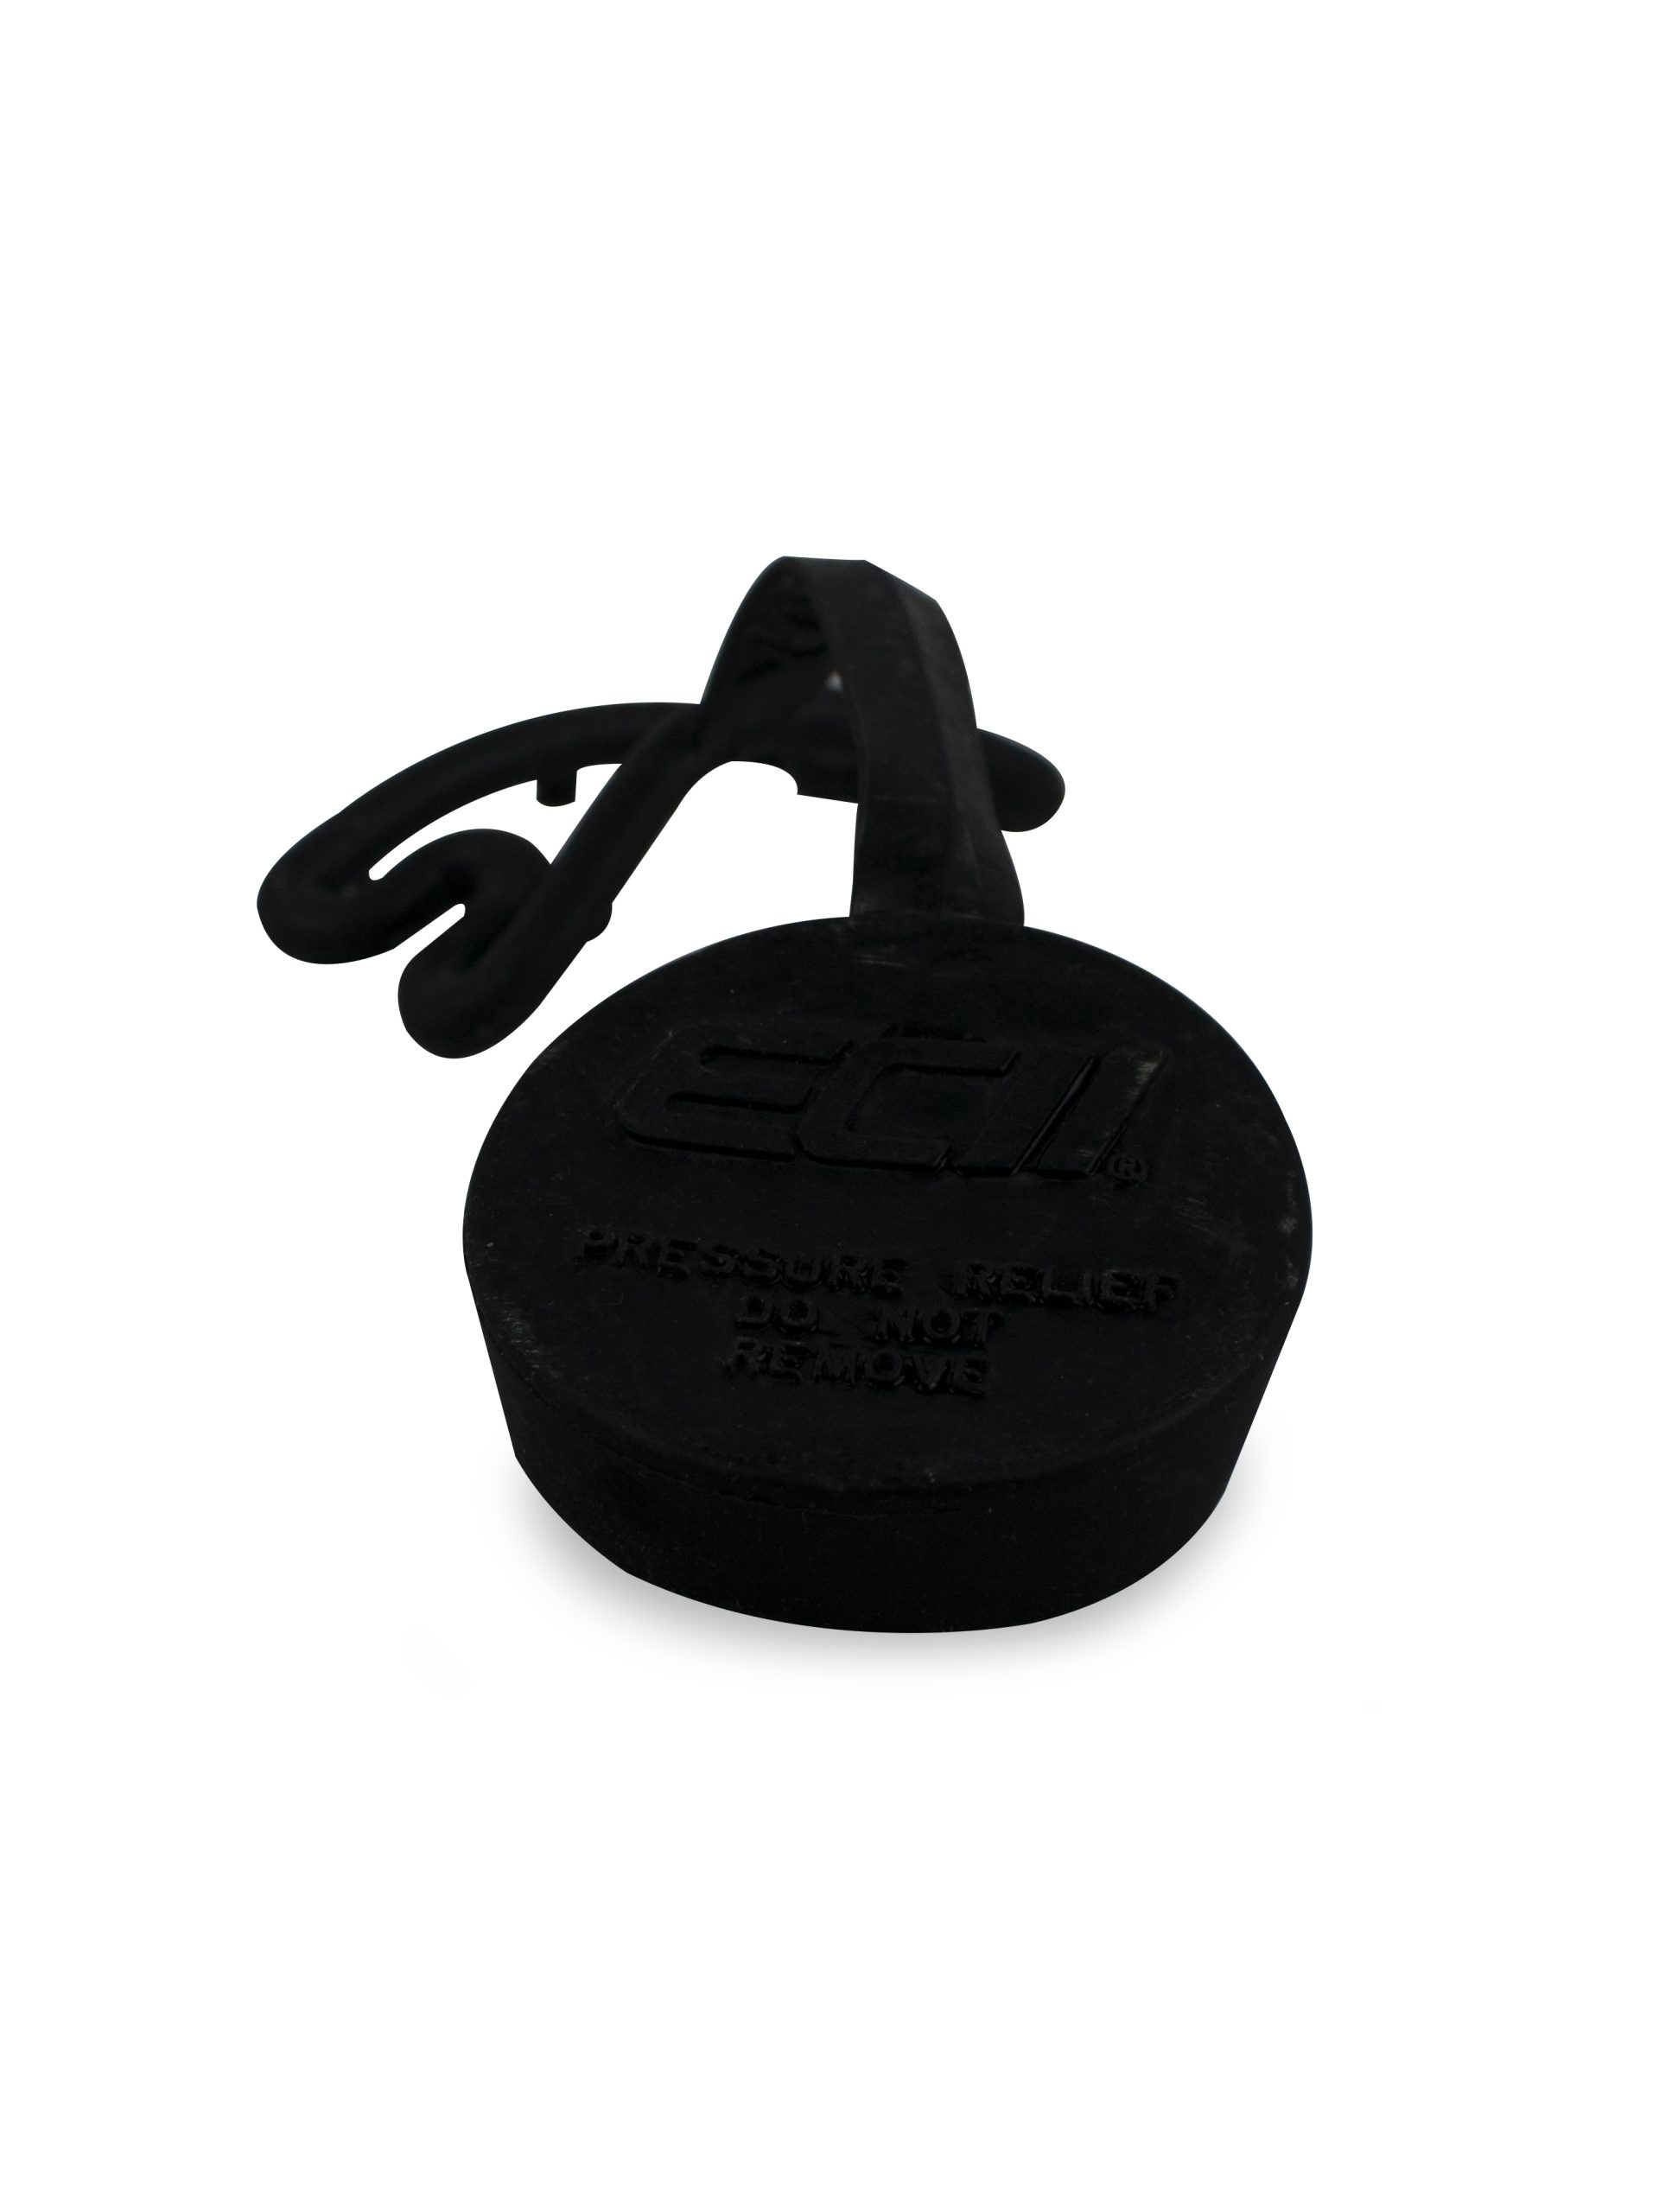 PLASTIC CAP FOR SAFETY RELIEF VALVE 1 Inches from Gas Equipment Company Llc Abu Dhabi, UNITED ARAB EMIRATES